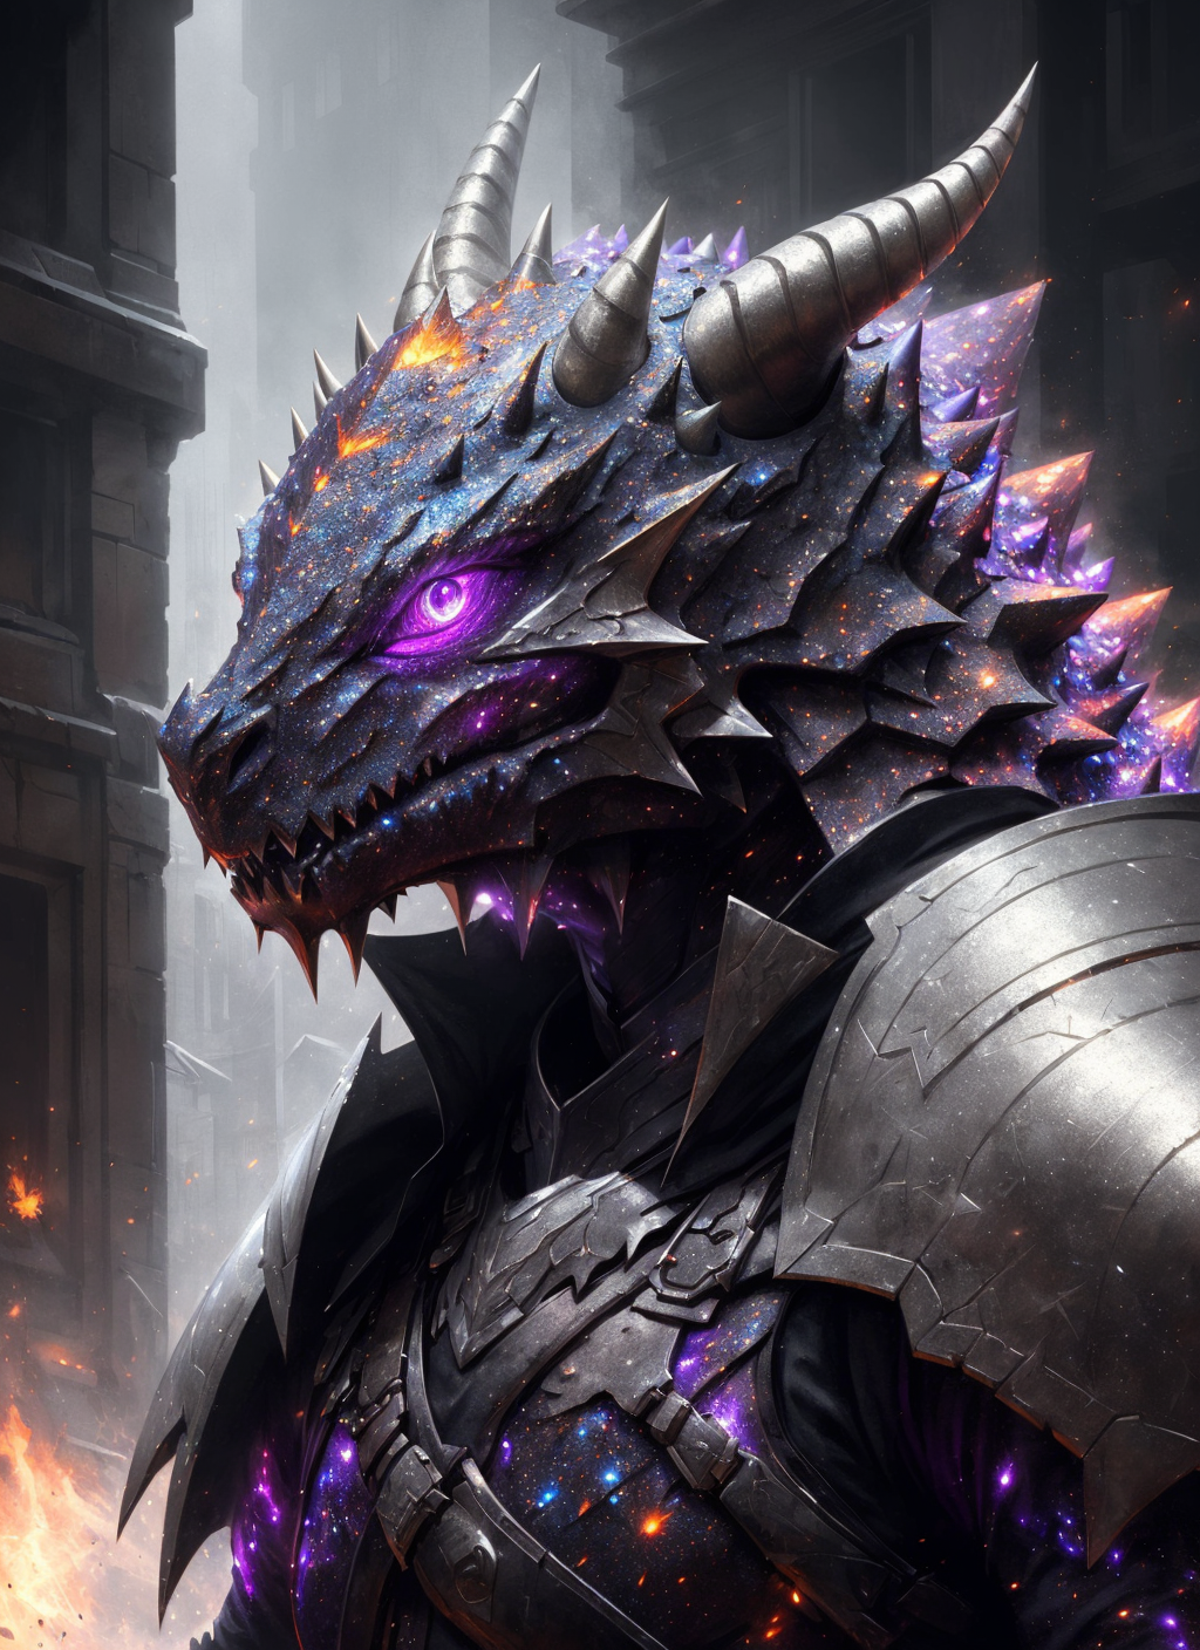 A 3D rendered dragon with purple eyes and spiky horns on its head, standing in front of a building.